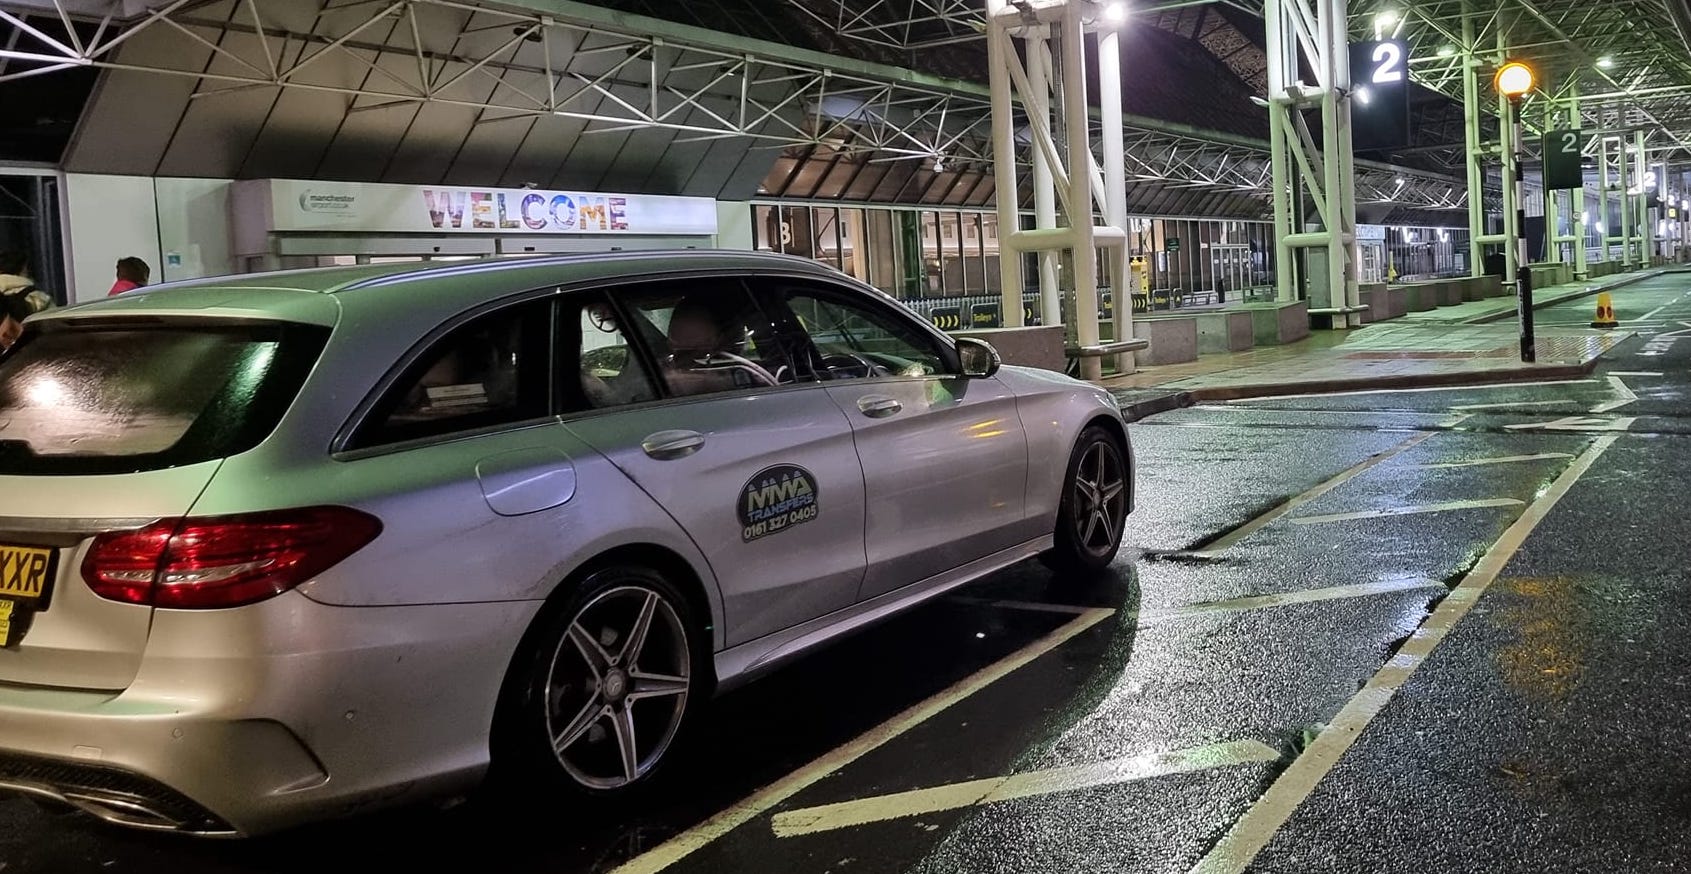 Take a Taxi from Manchester Airport to Stoke with a free Meet and Greet Service